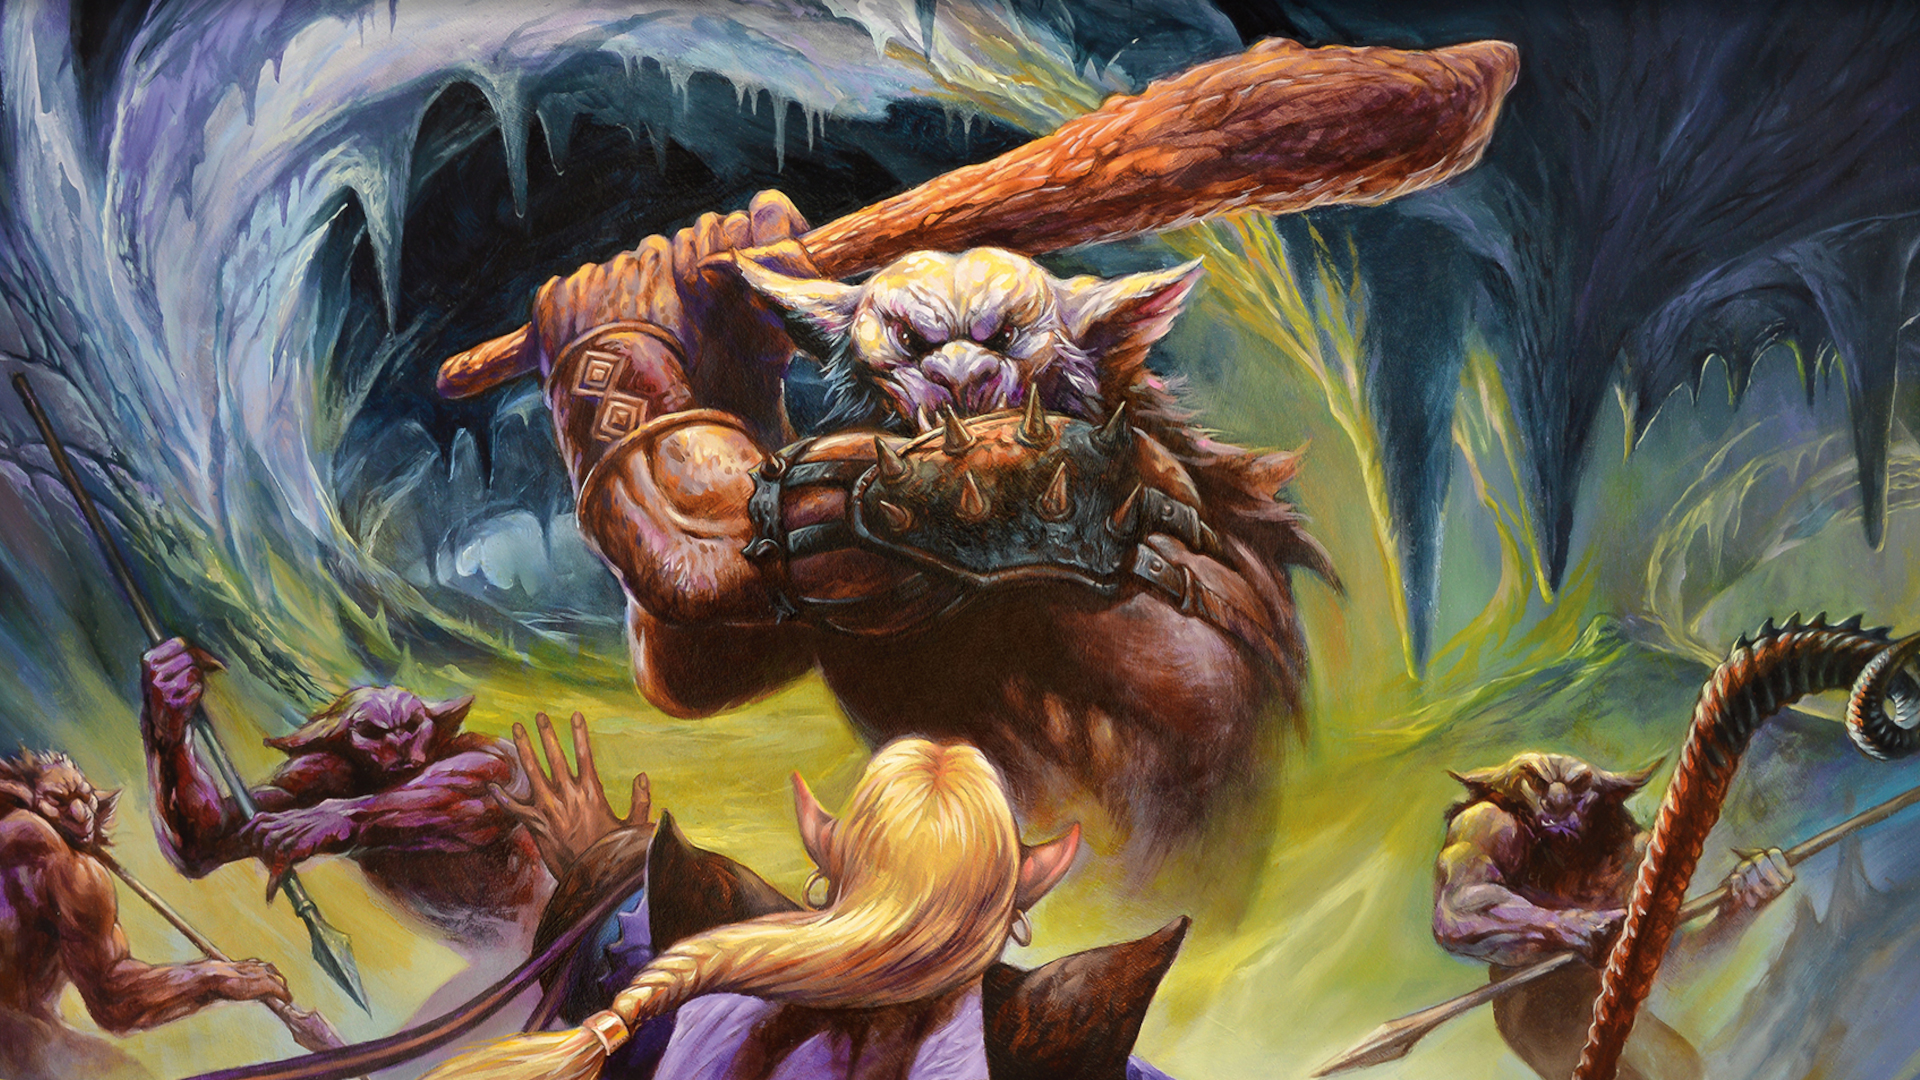 MTG Standard Rotation Guide - Illustration from Wizards of the Coast showing an illustration of Bugbear from Adventures in the Forgotten Realms